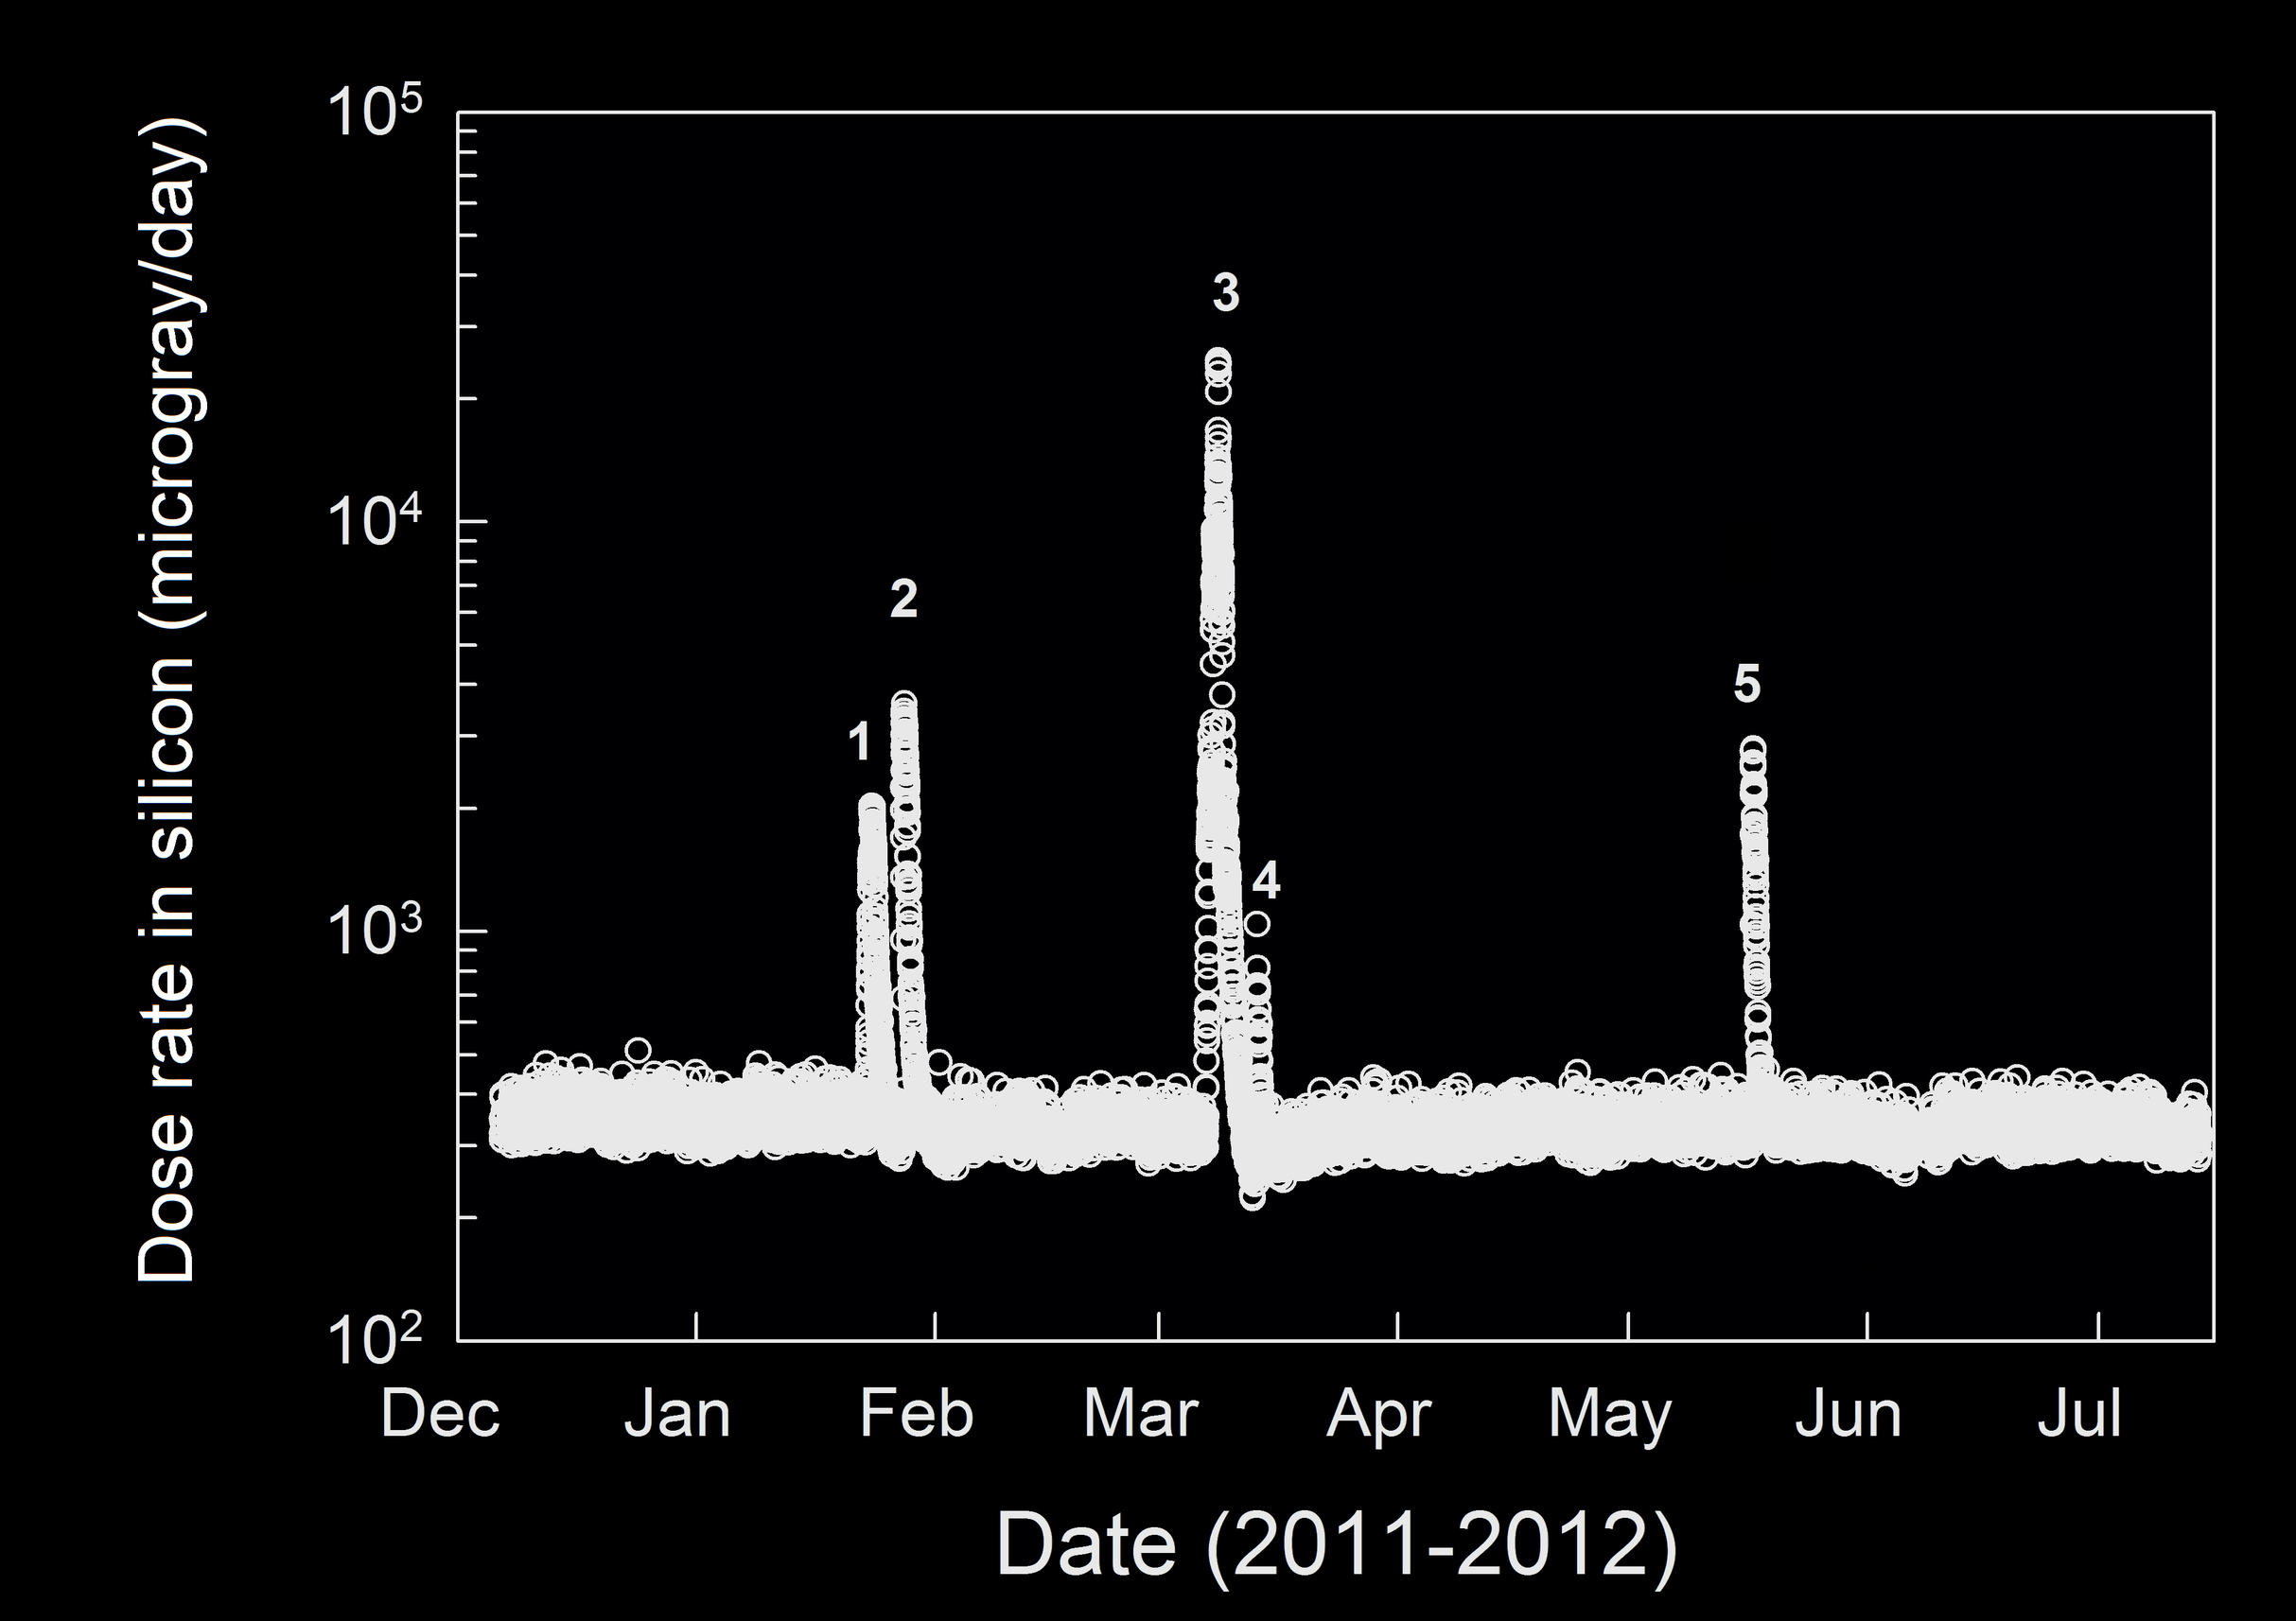 This graphic shows the level of natural radiation detected by the Radiation Assessment Detector shielded inside NASA's Mars Science Laboratory on the trip from Earth to Mars from December 2011 to July 2012.